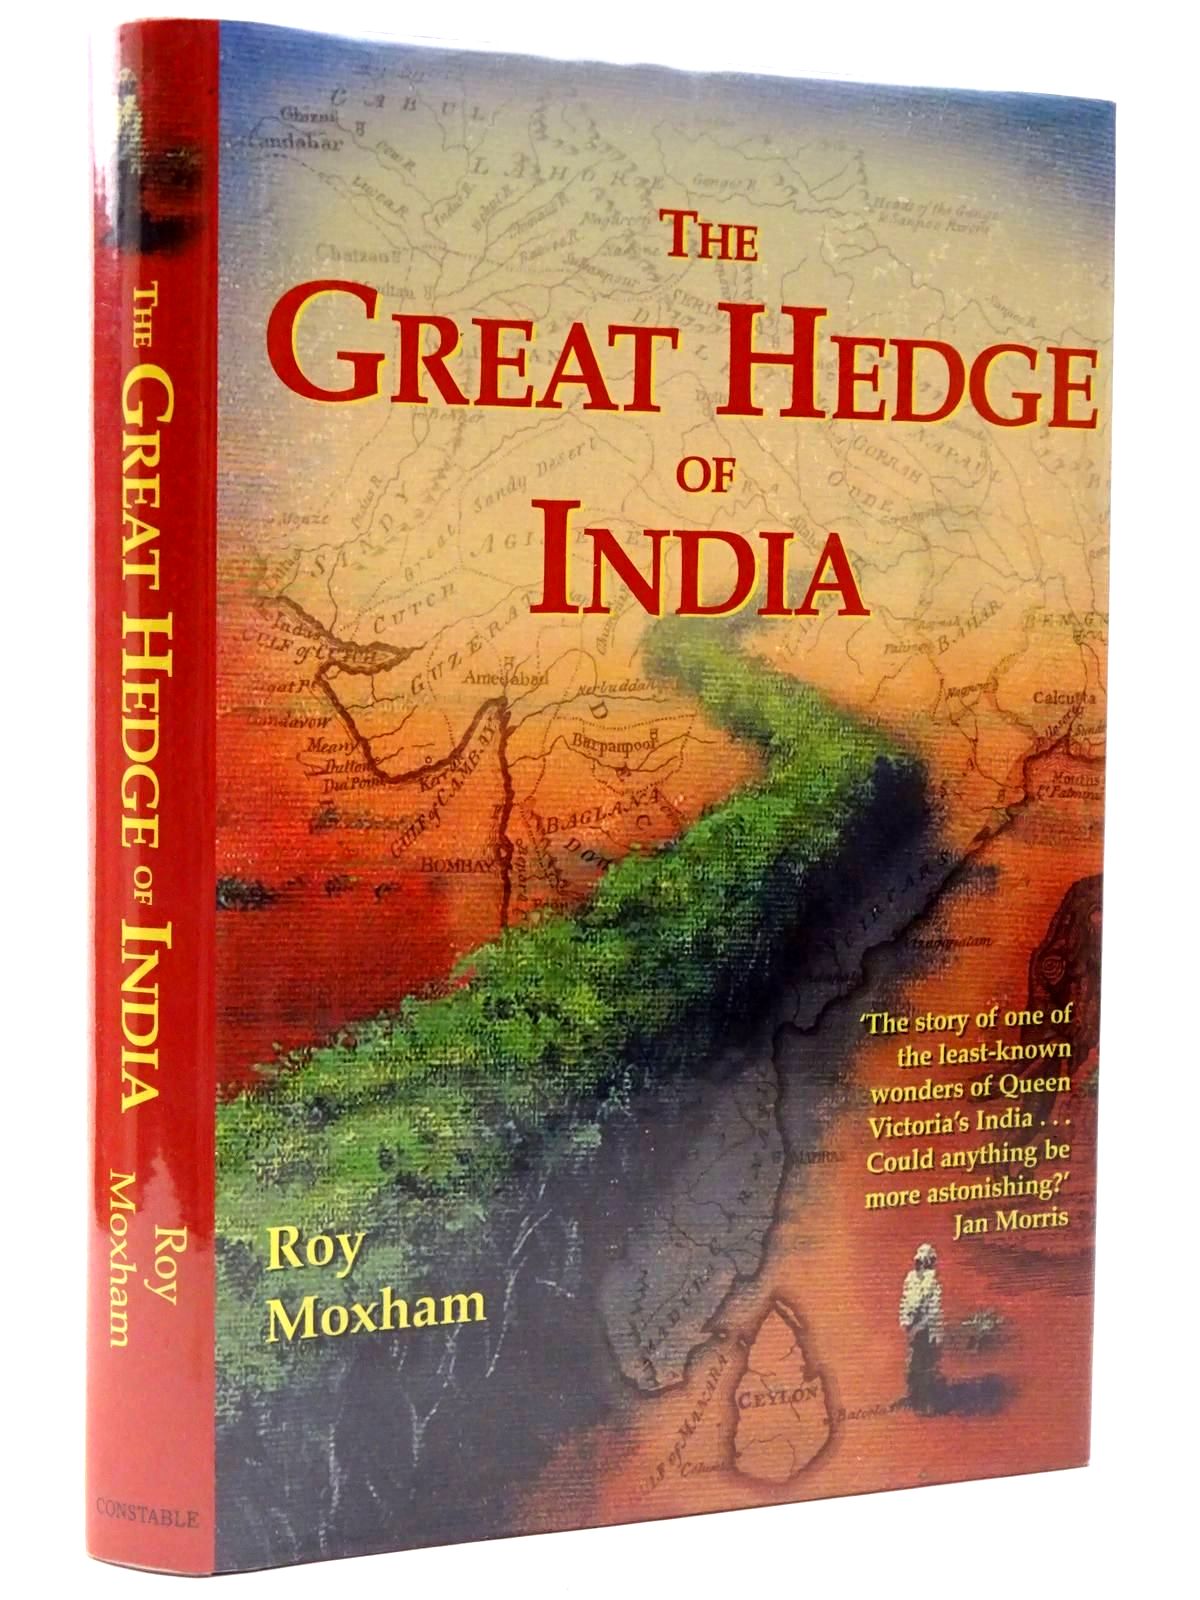 Photo of THE GREAT HEDGE OF INDIA written by Moxham, Roy published by Constable (STOCK CODE: 2129985)  for sale by Stella & Rose's Books